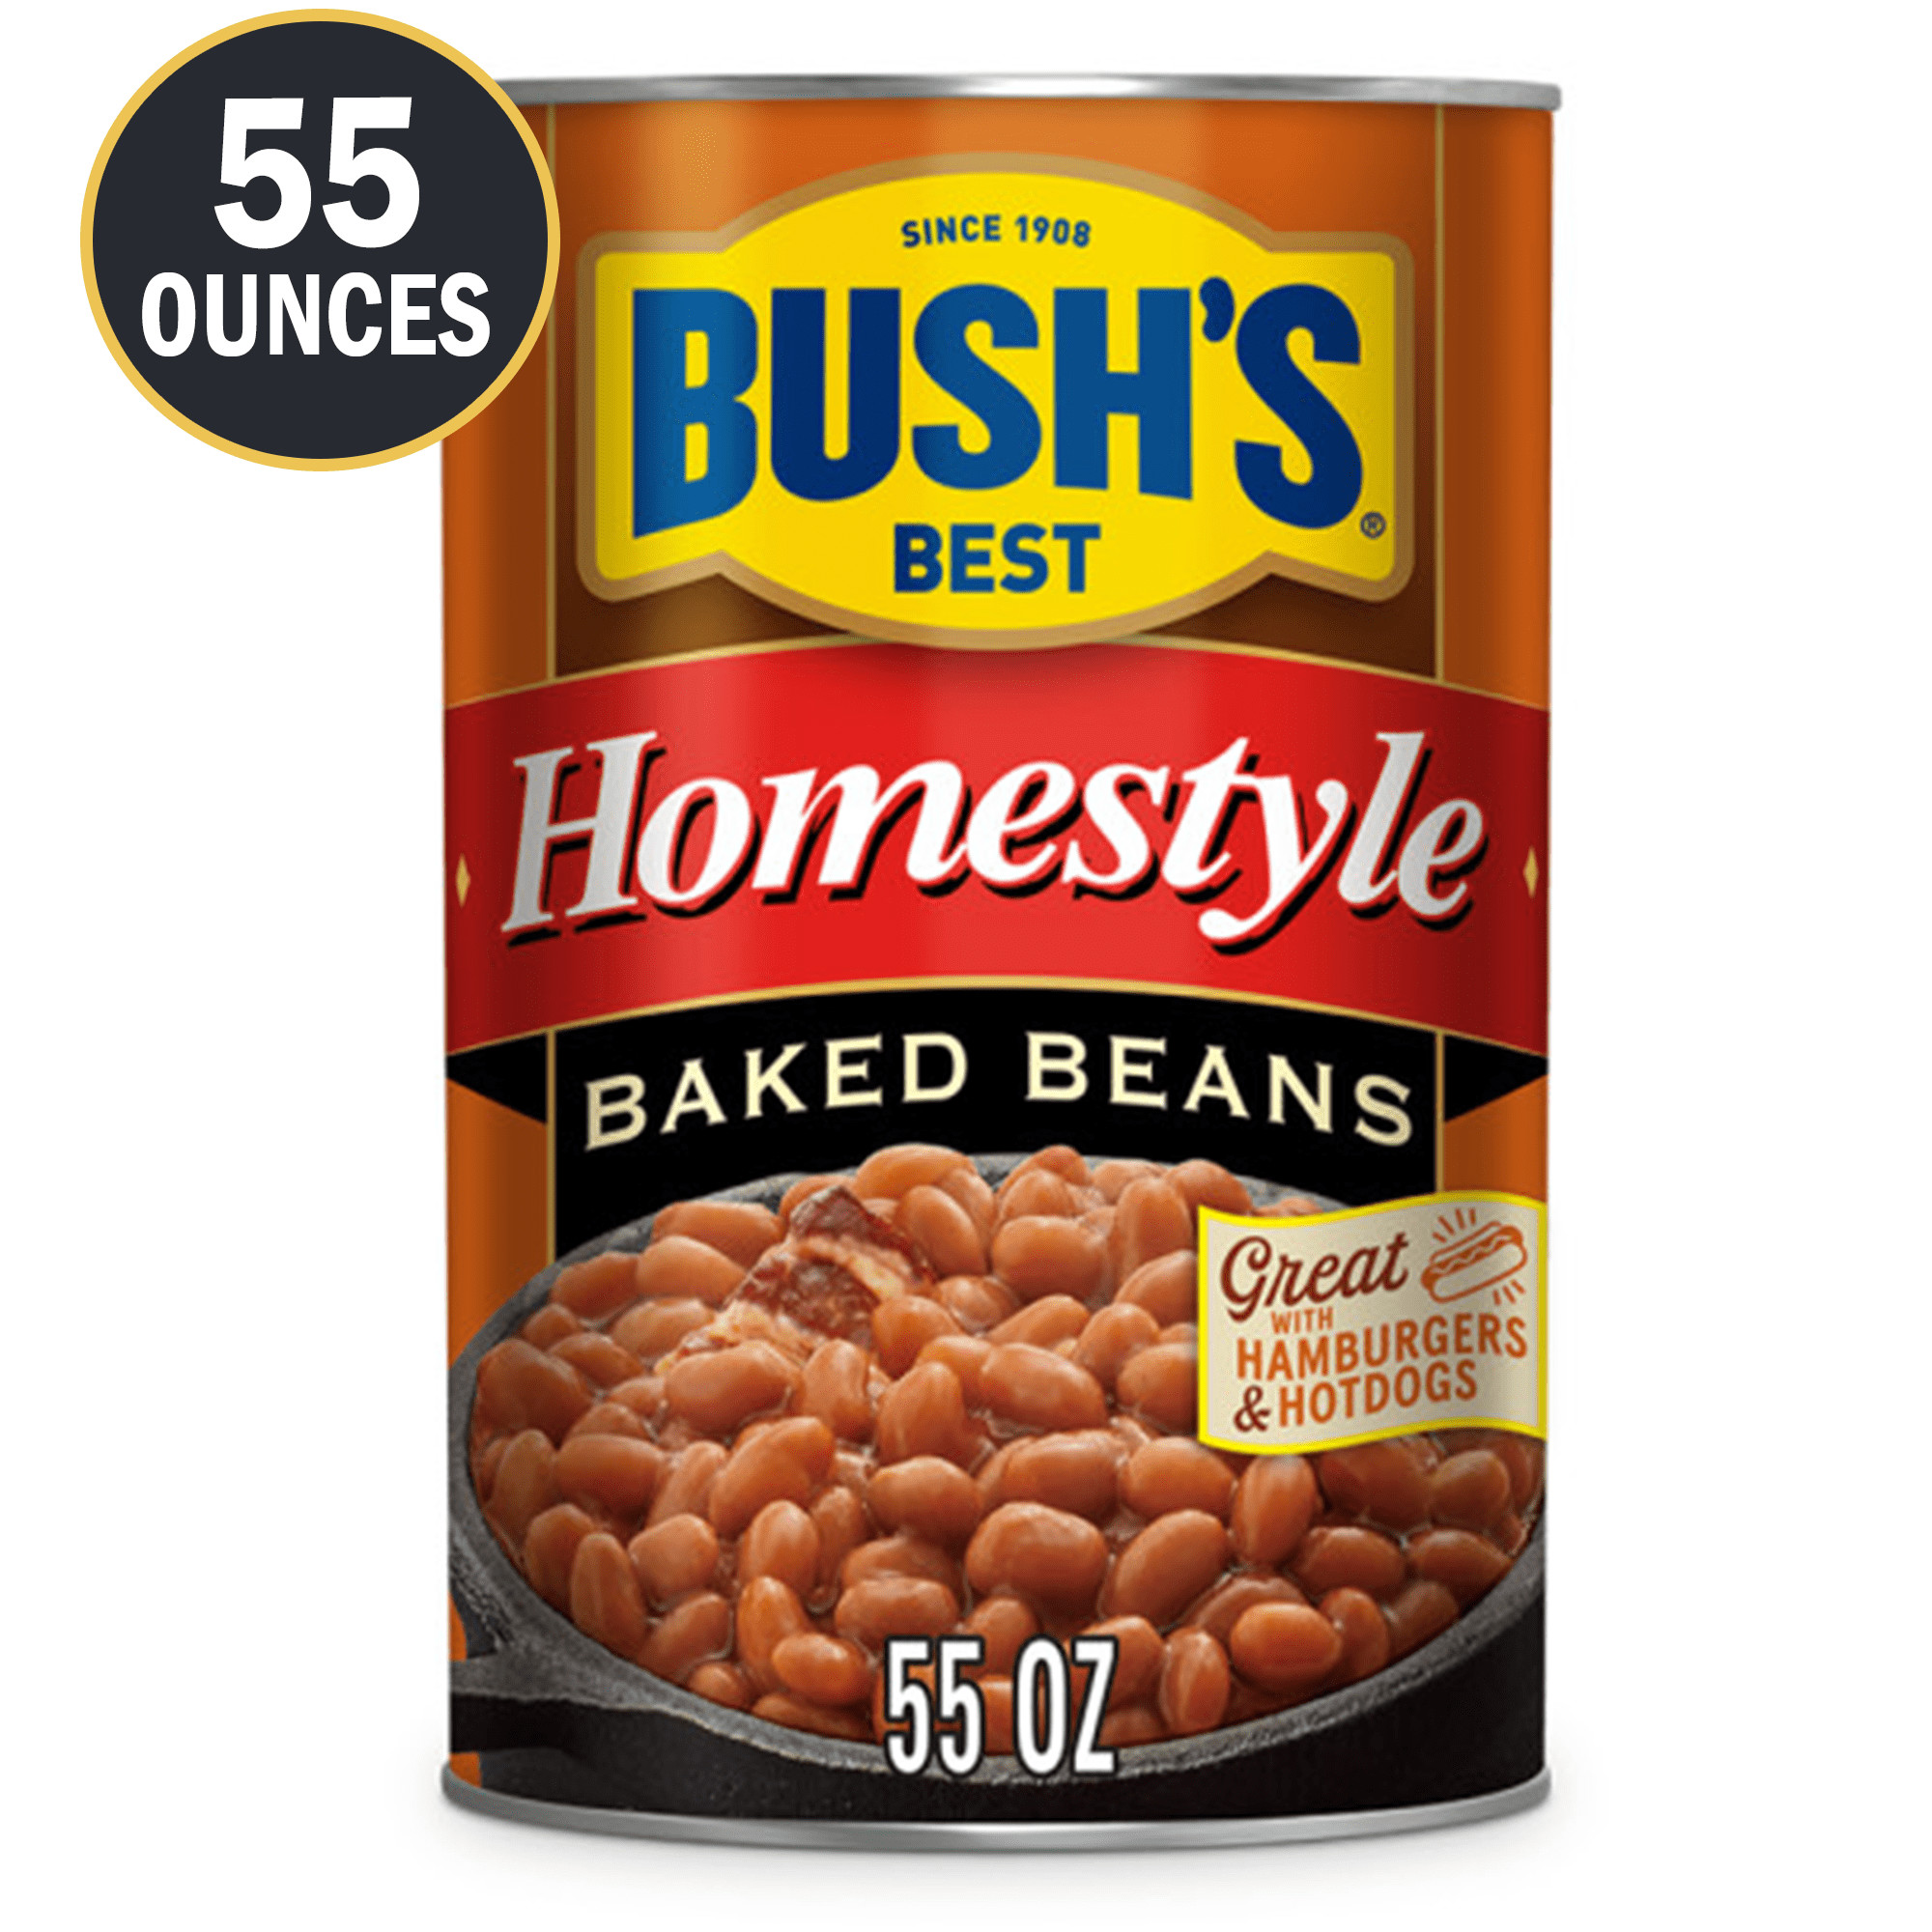 Bush's Homestyle Baked Beans, Canned Beans, 55 oz Can - image 1 of 7